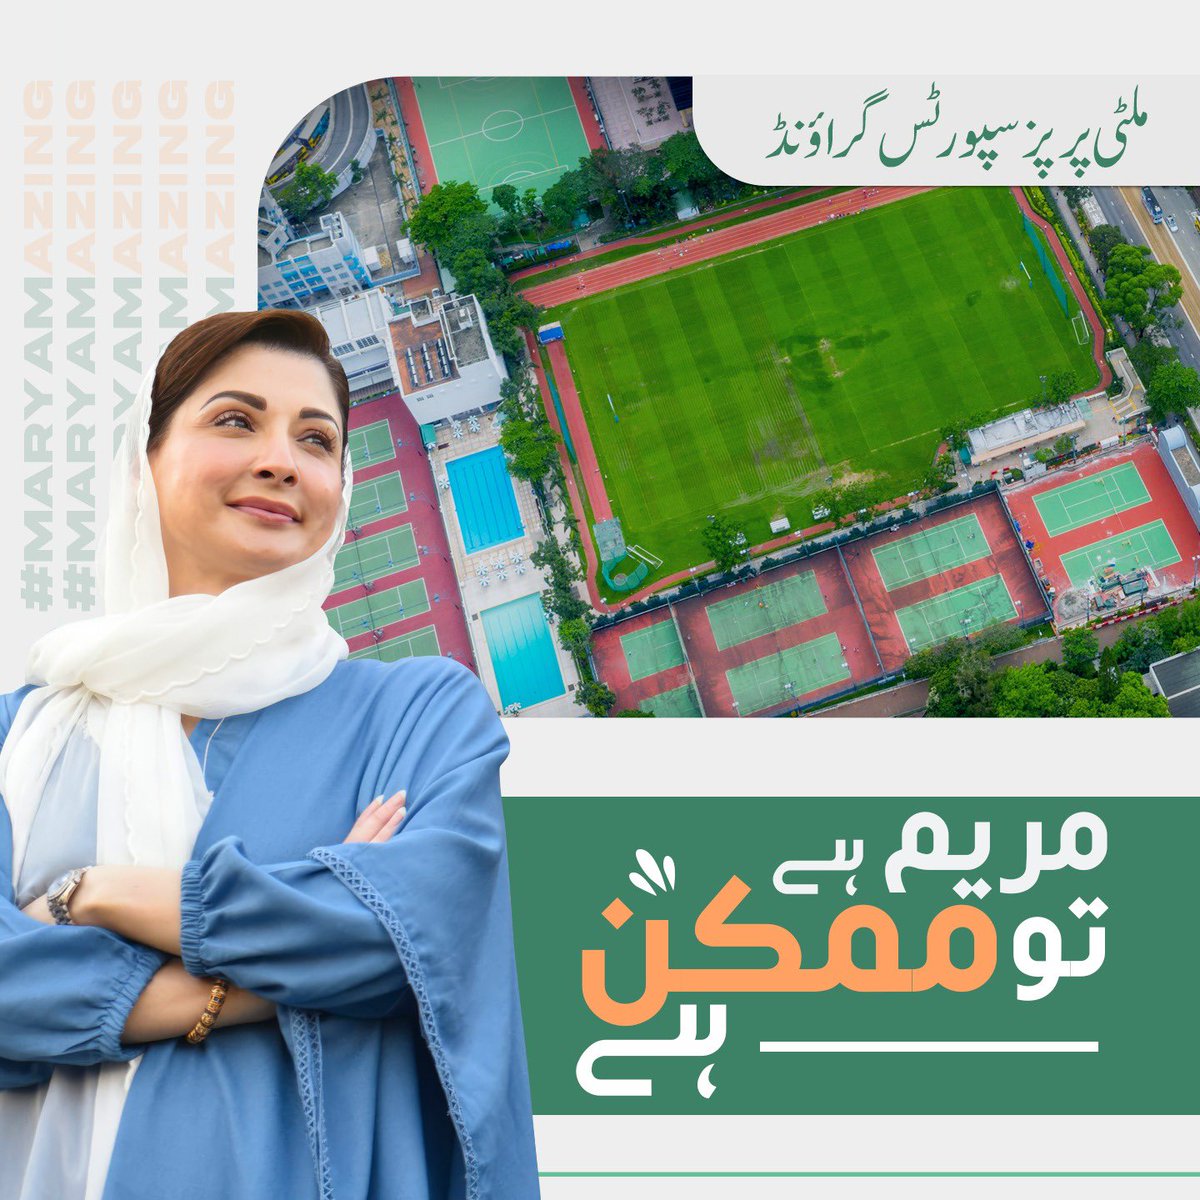 If there is Maryam, it is possible! - Women hostels for working women. - Multi purpose Sports ground for athletes.